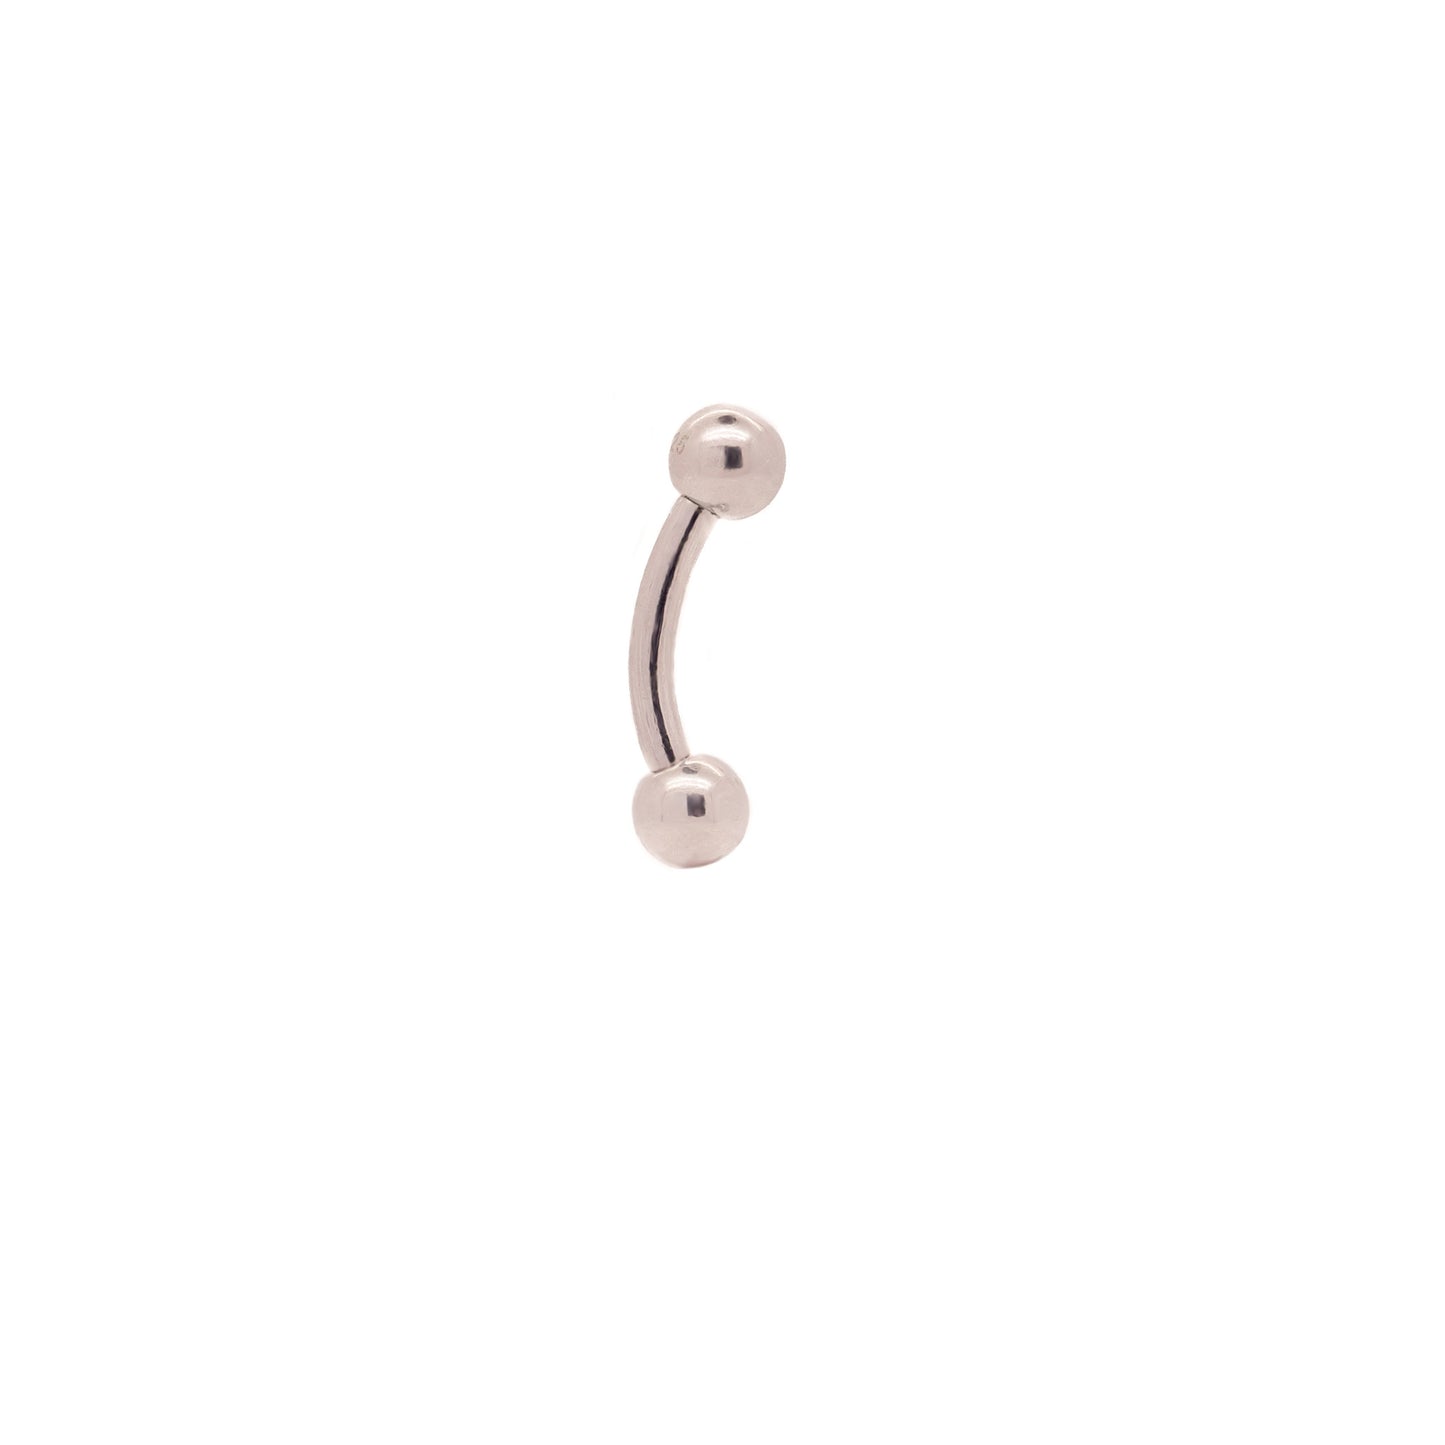 Solid 925 Silver | 16G 14G 4mm Petite Ball Combination Curved Barbell Belly Ring | 6mm 1/4" 8mm 5/16" 10mm 3/8" 12mm 15/32" | Rook | Eyebrow - Sturdy South